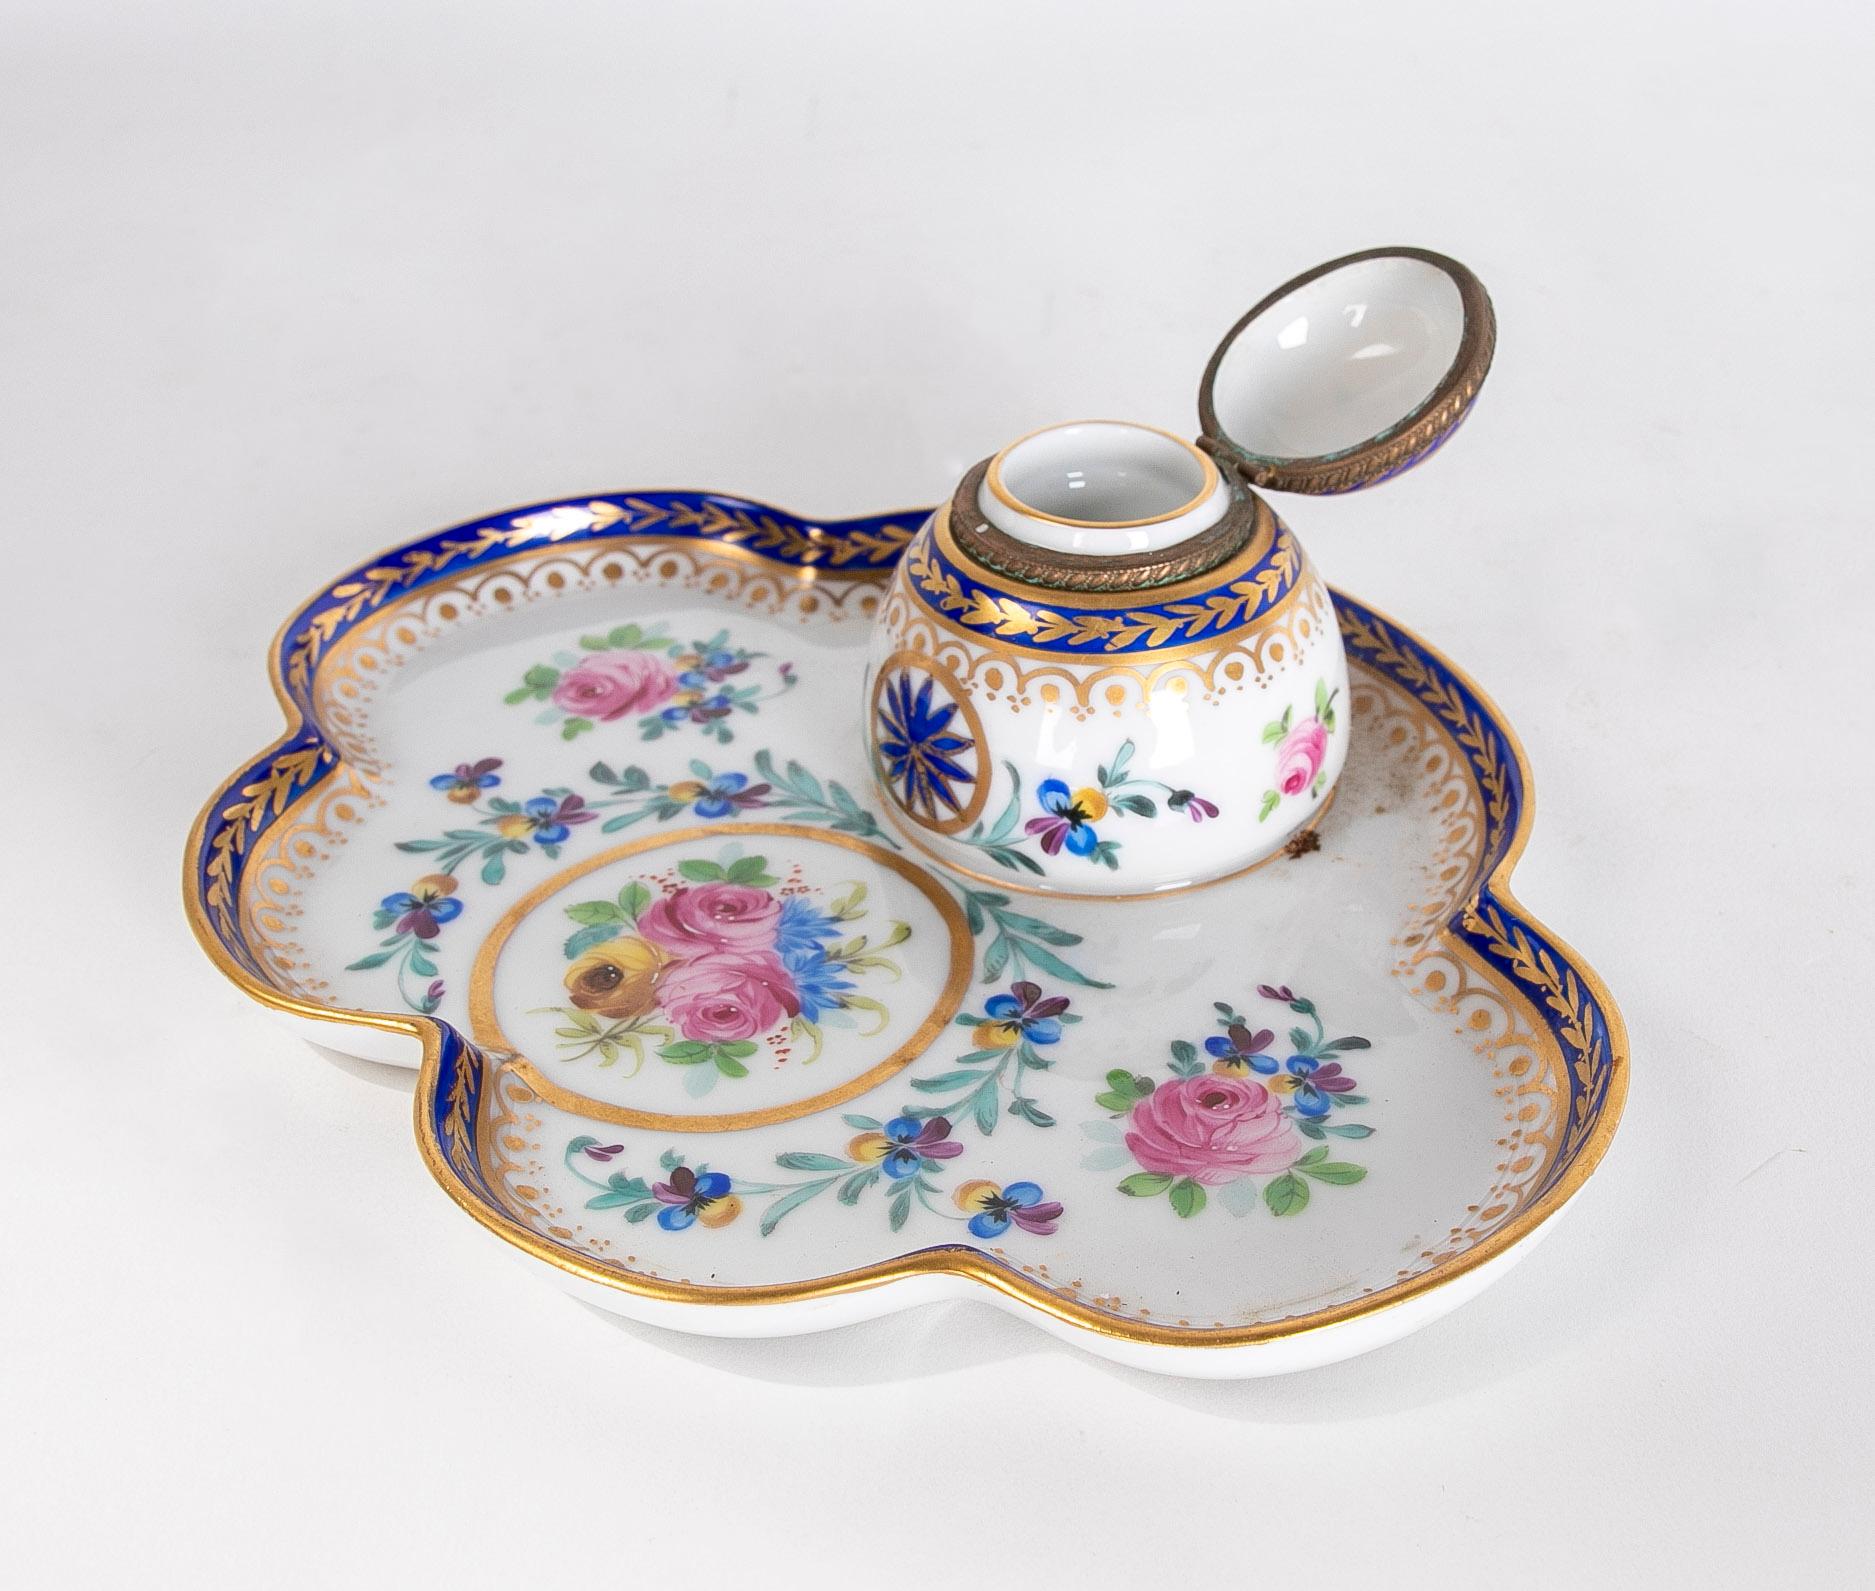 19th century Austrian Porcelain Inkwell with Tray with Stamp on the Side.